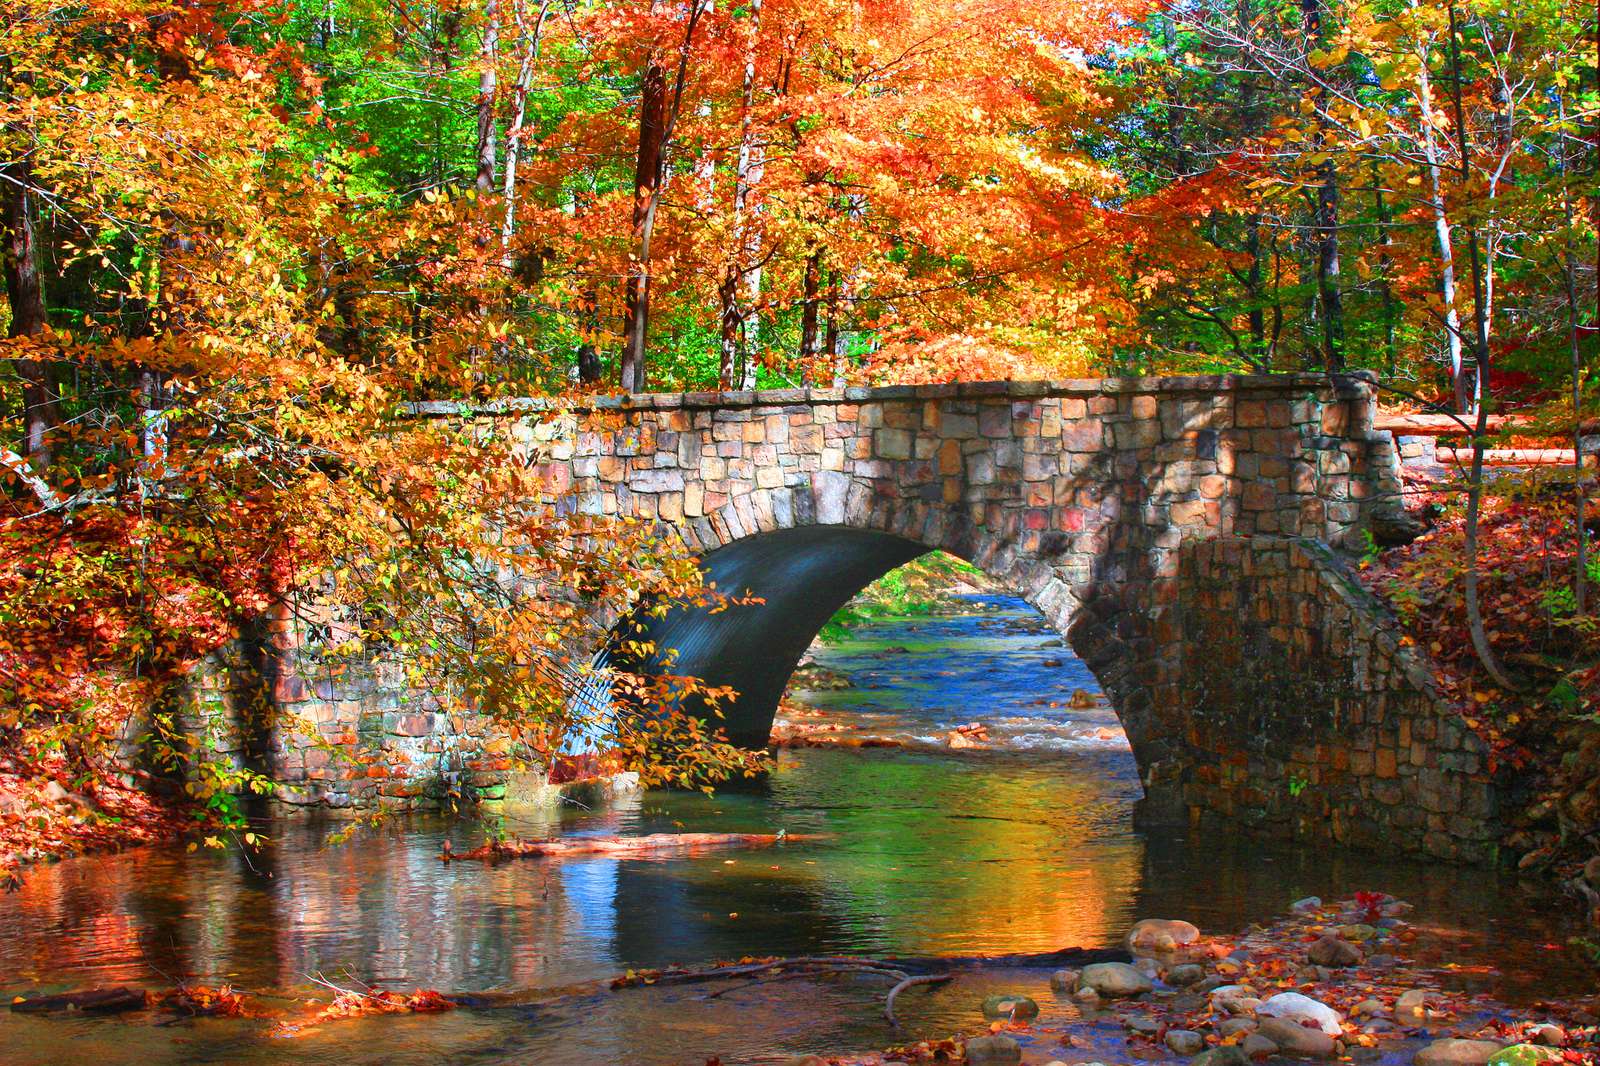 Bridge Fall puzzle online from photo